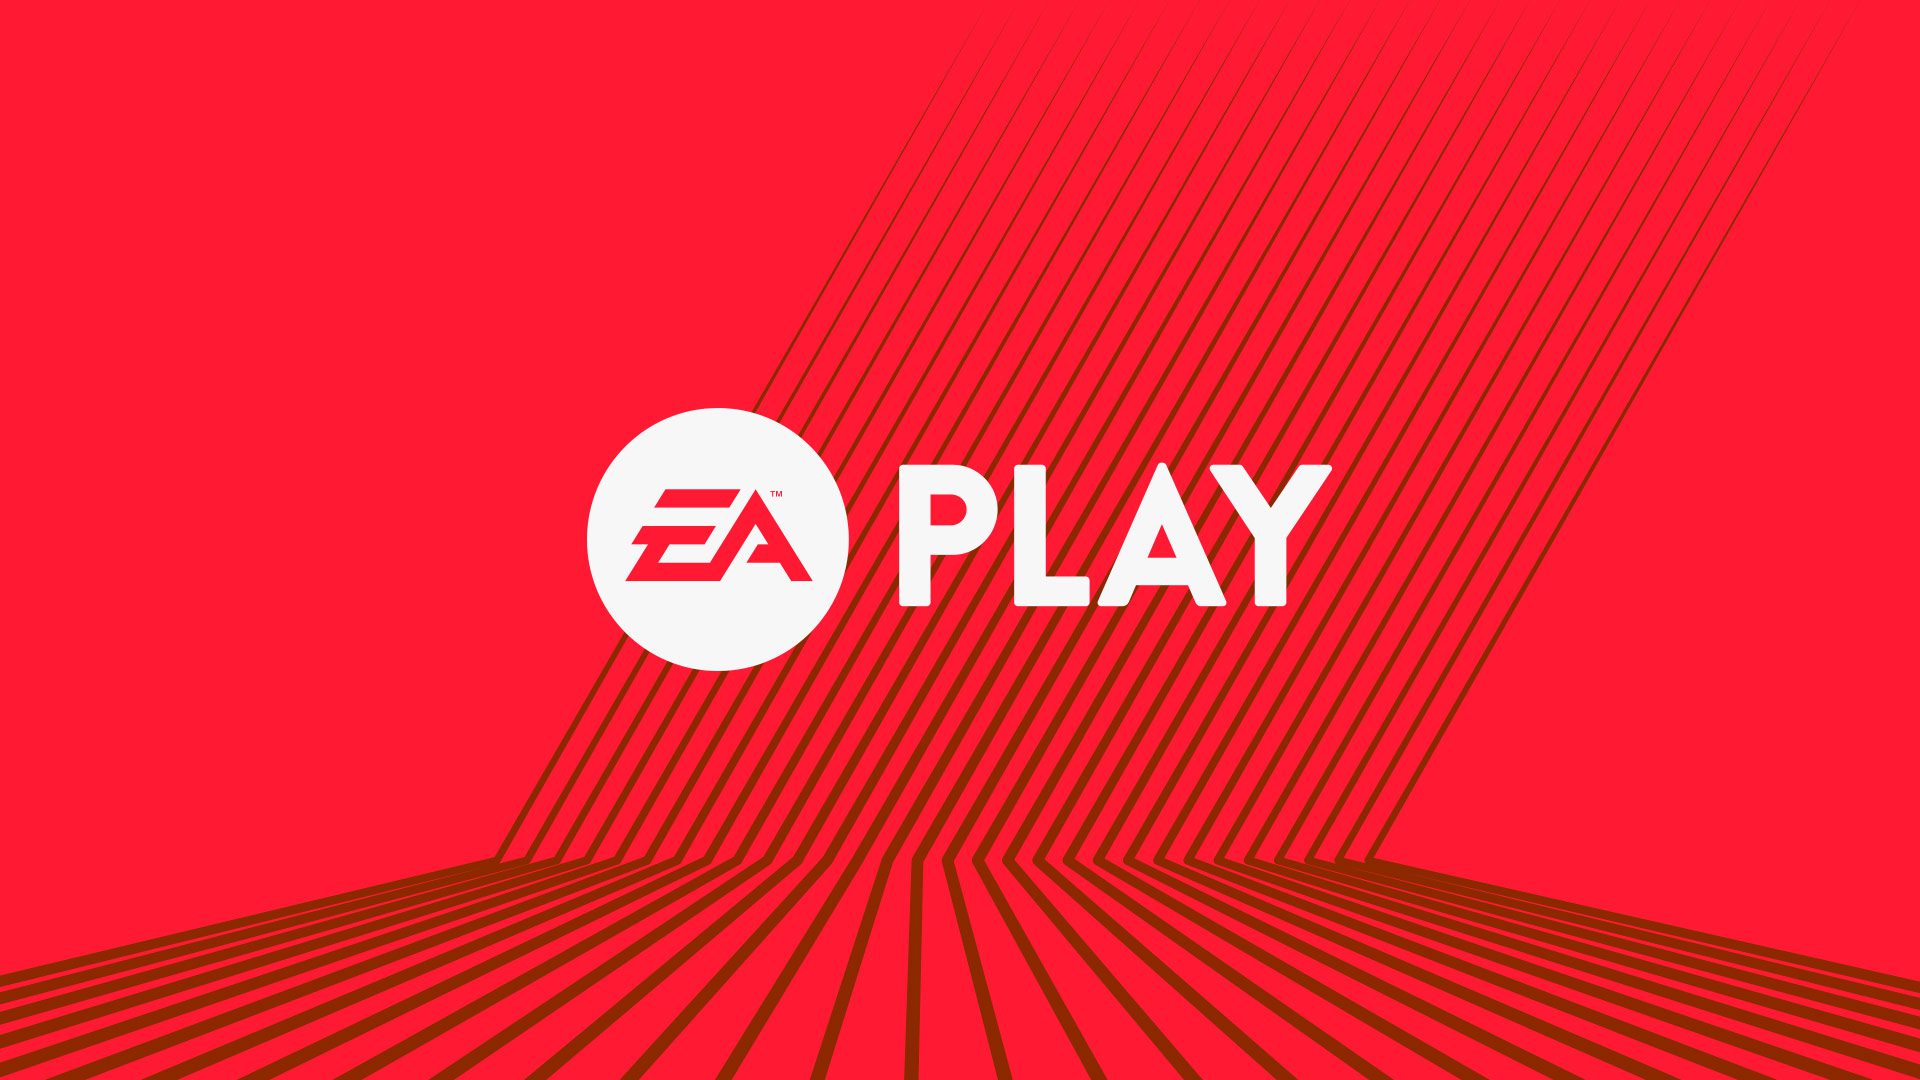 Tune into “Live @ EA Play” to check out 8 upcoming games and surprises